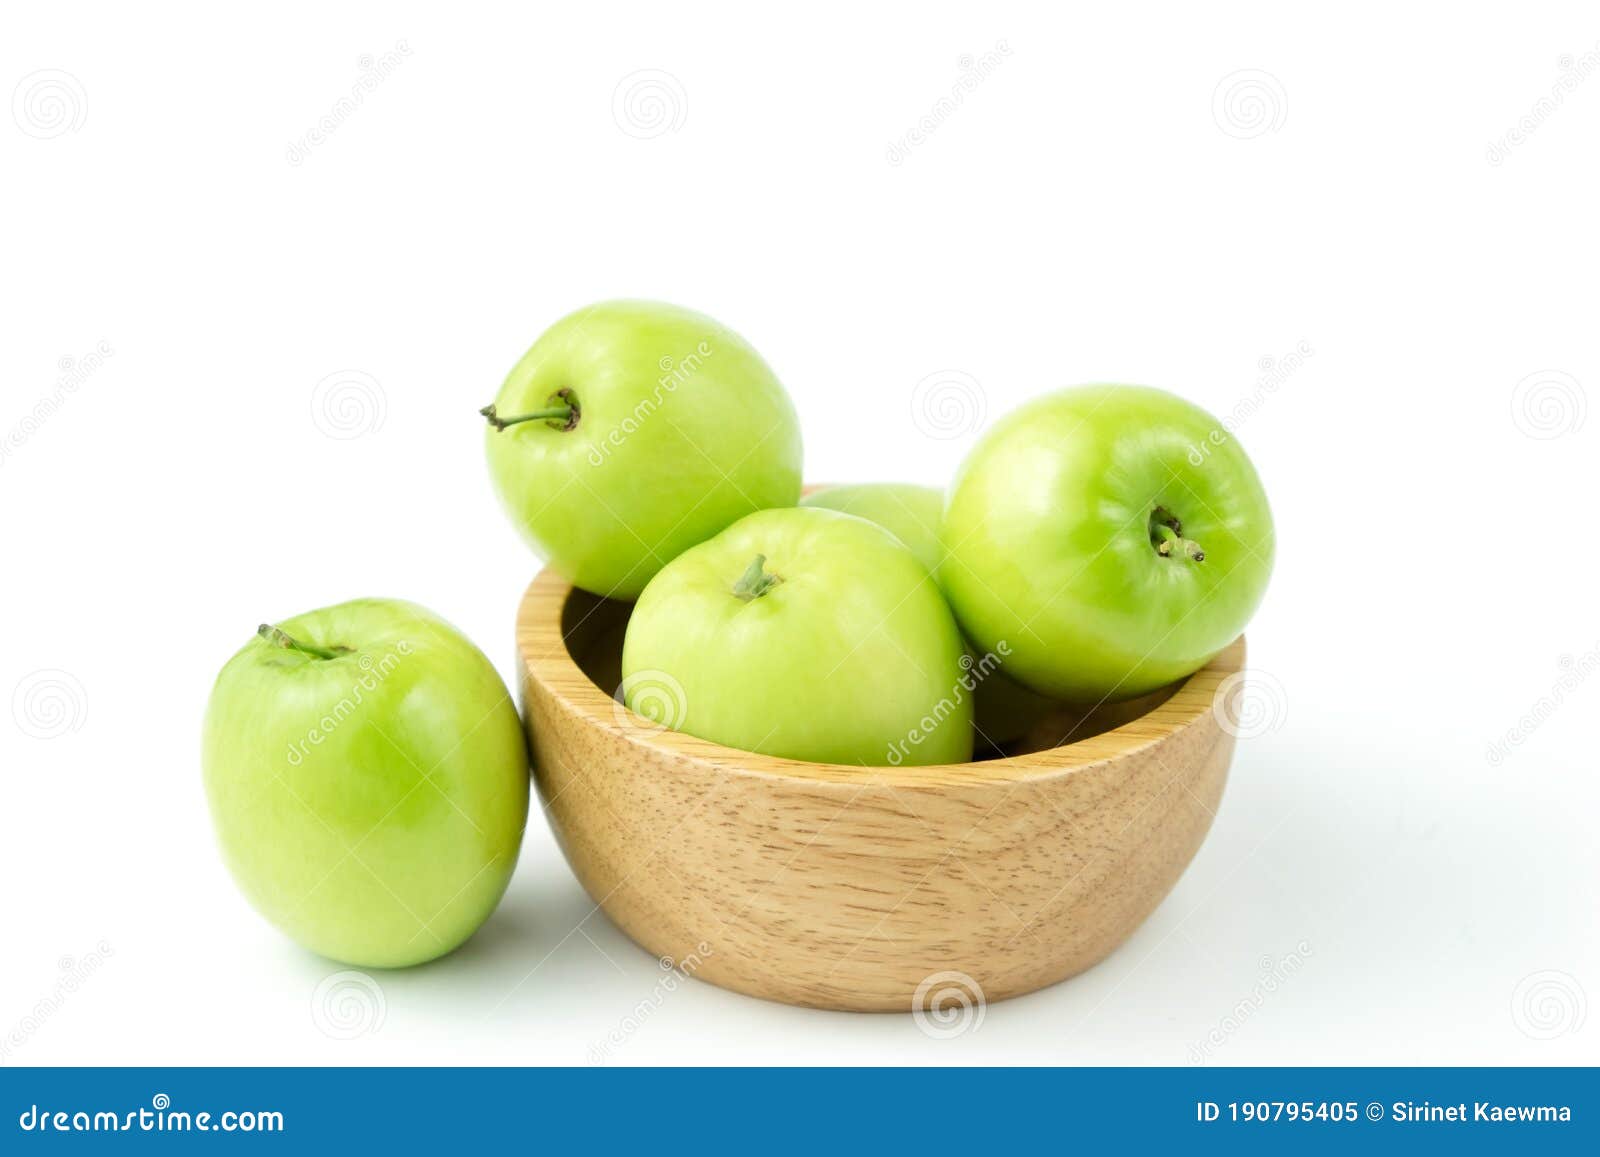 apple monkey or jujub zizyphus mauritiana lam  green fruit in wooden cup on white background and clipping path